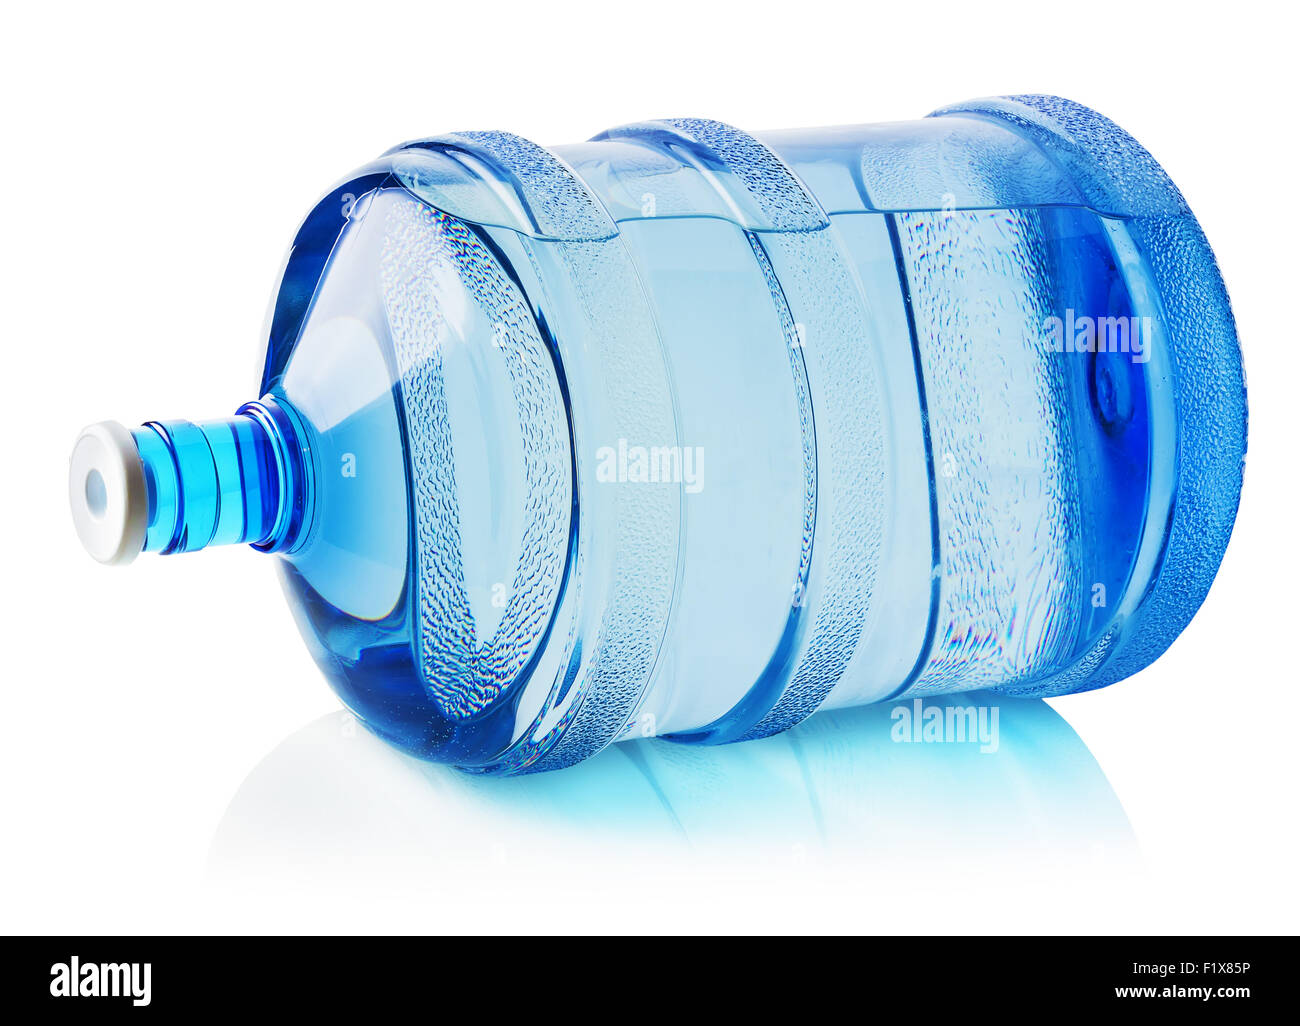 59,775 Large Water Containers Images, Stock Photos, 3D objects, & Vectors